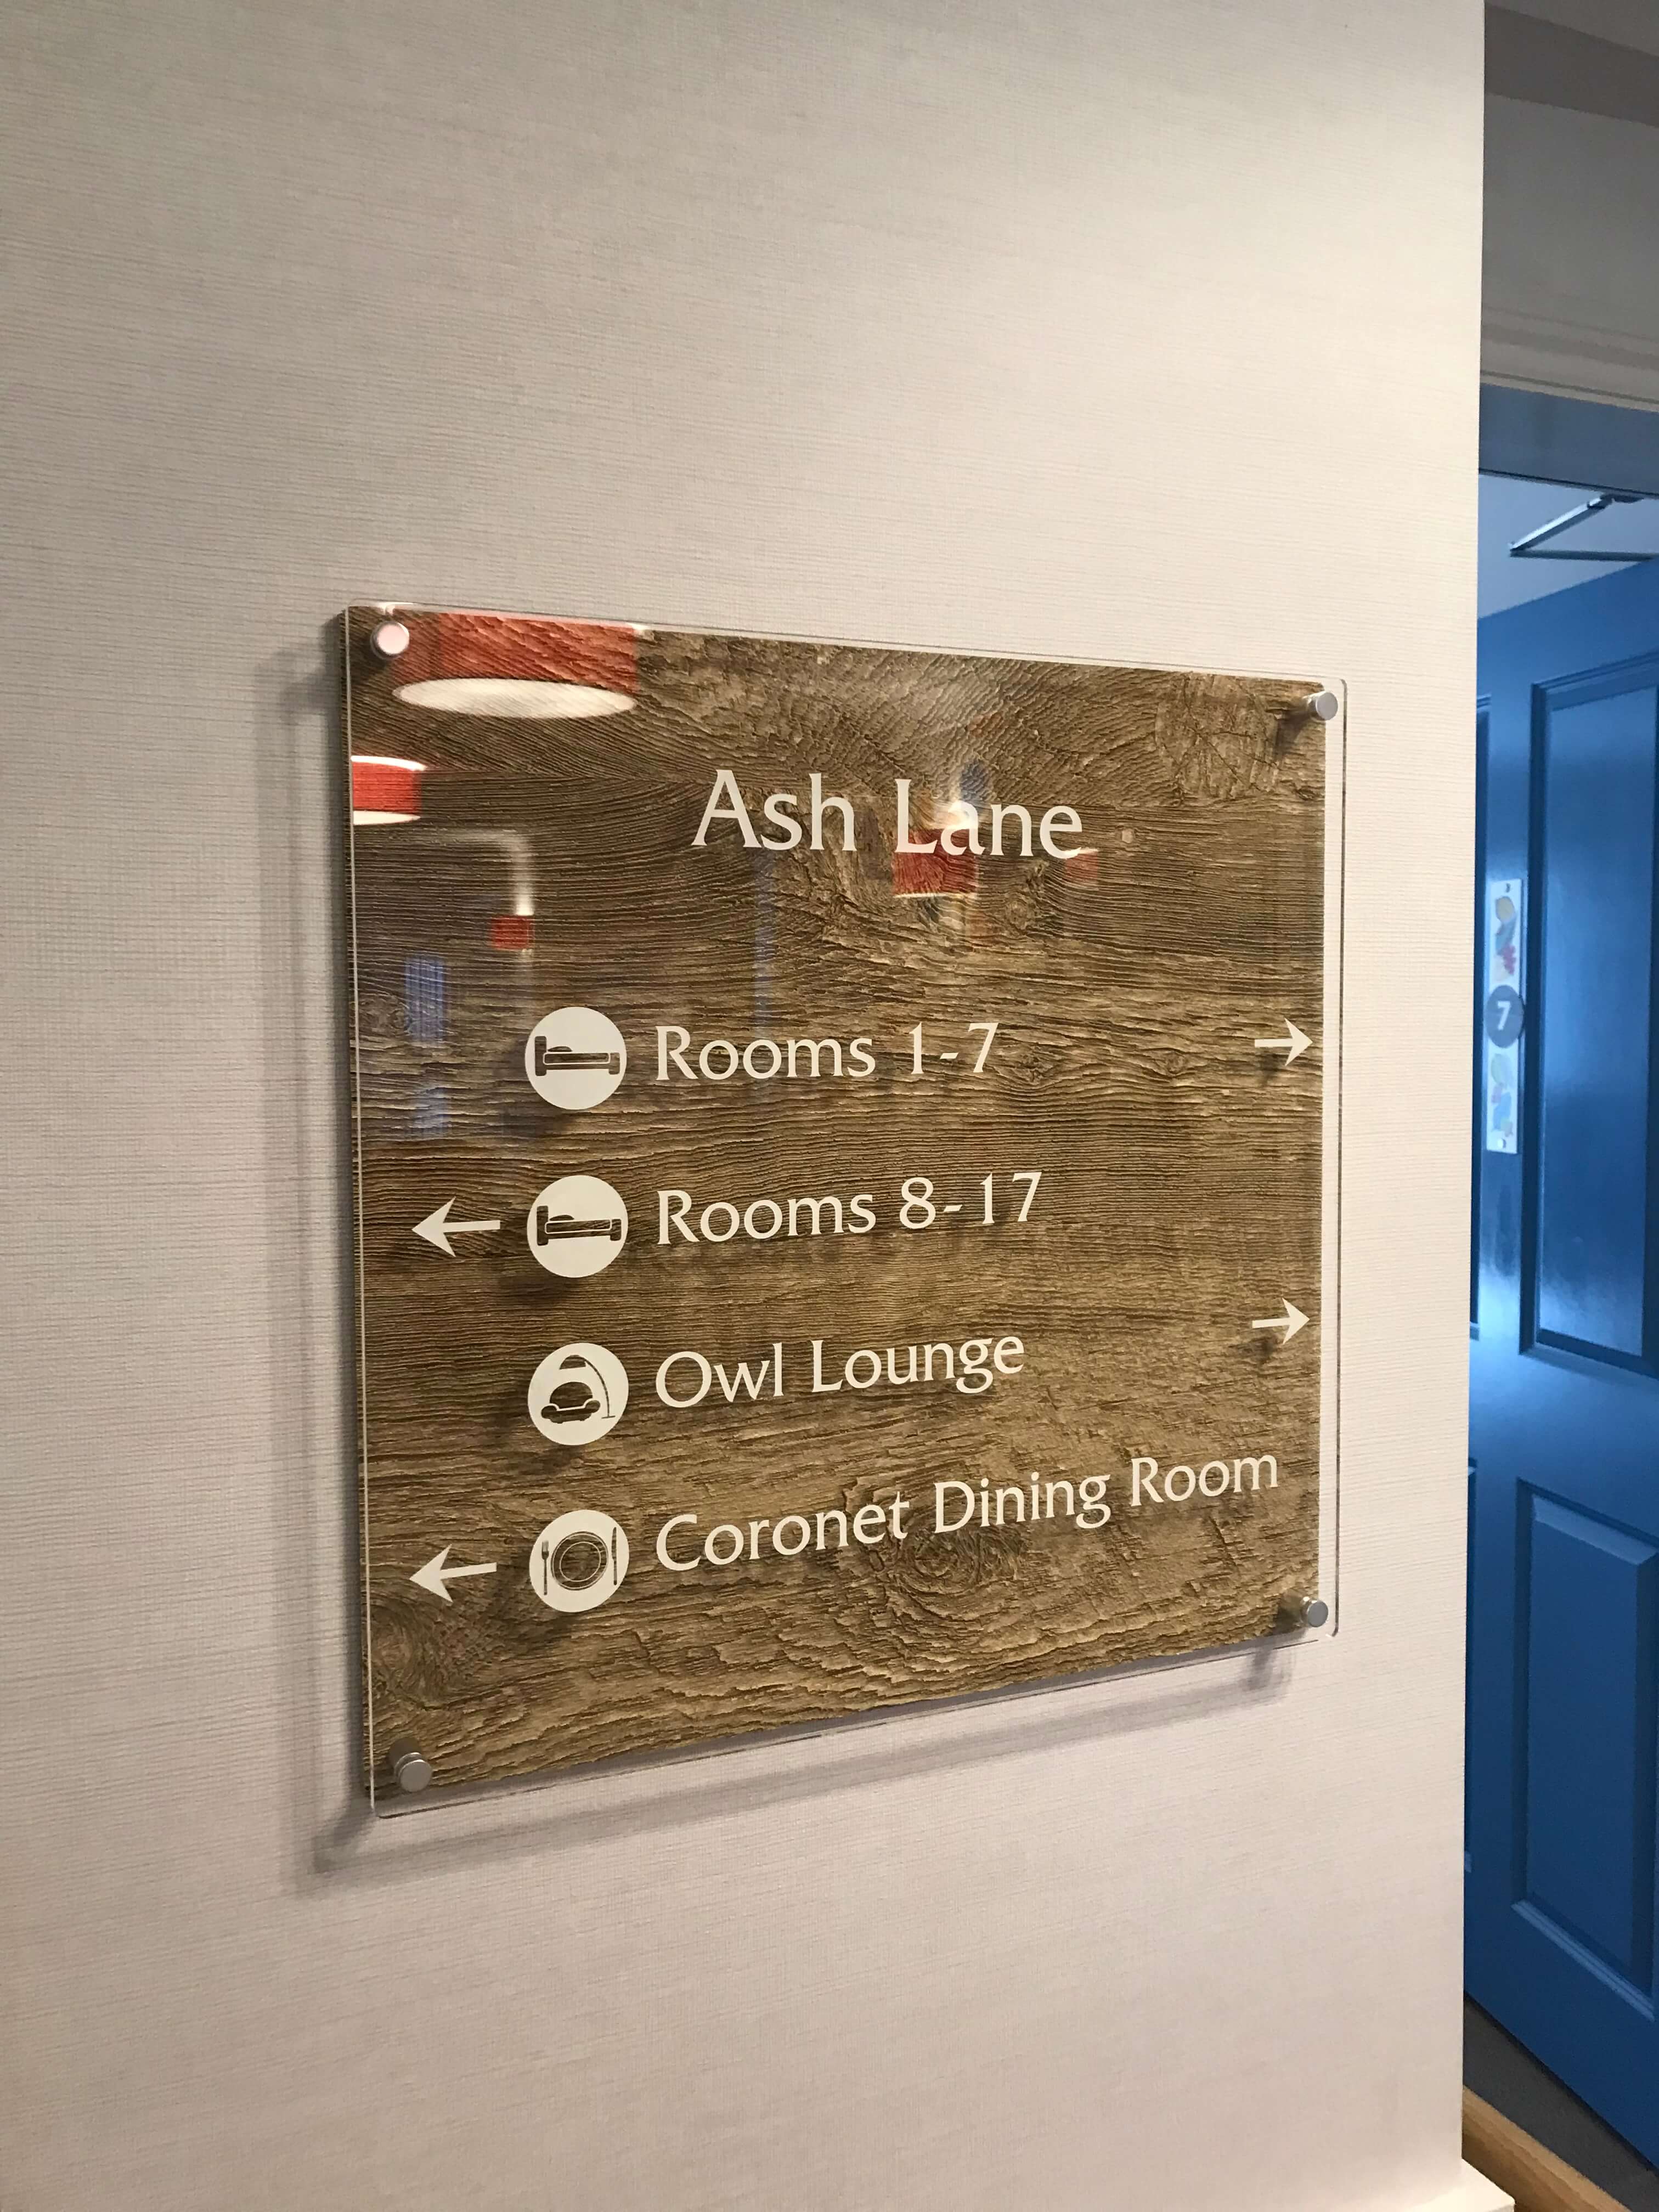 wayfinding-dementia-signage-beechwood-grove-care-home-taylor-pickles